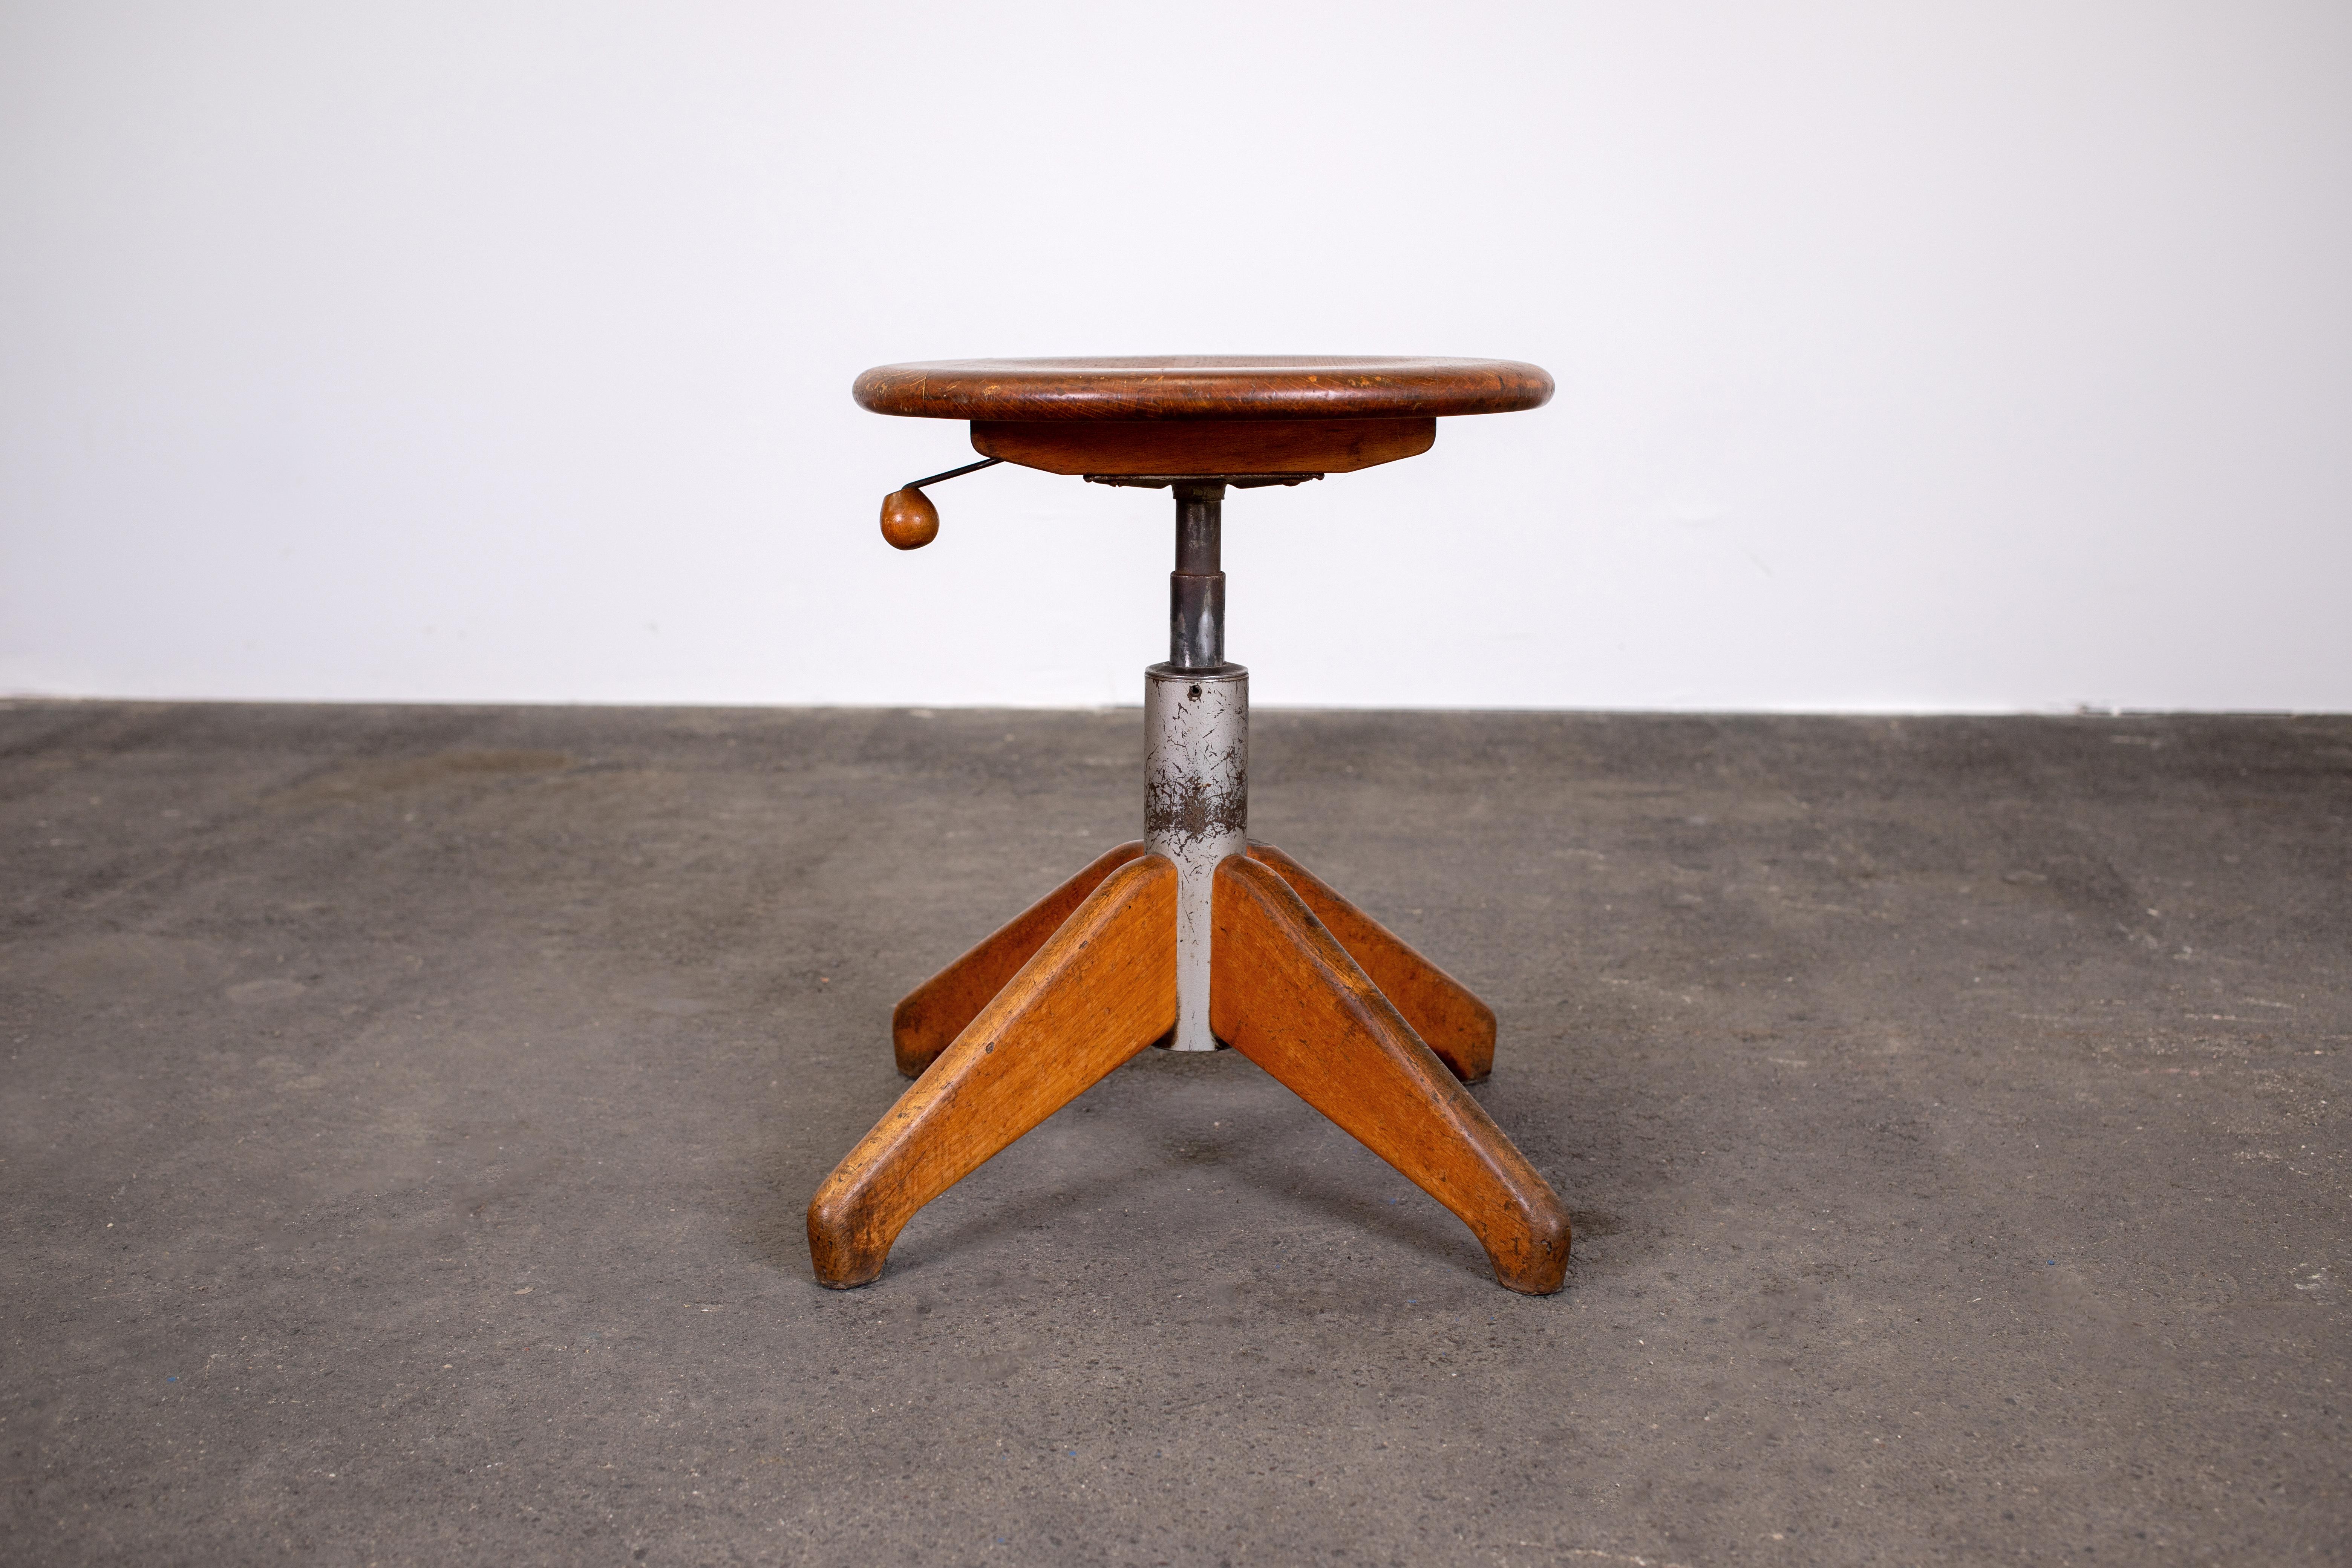 Historical Mid-Century Modern Swiss German Industrial swivel stool by Albert Stoll II for Giroflex Stoll, Switzerland. Ergonomic round dimpled oak seat sits atop the first patented spring cushioning system made of steel. Flanked with torpedo-wing